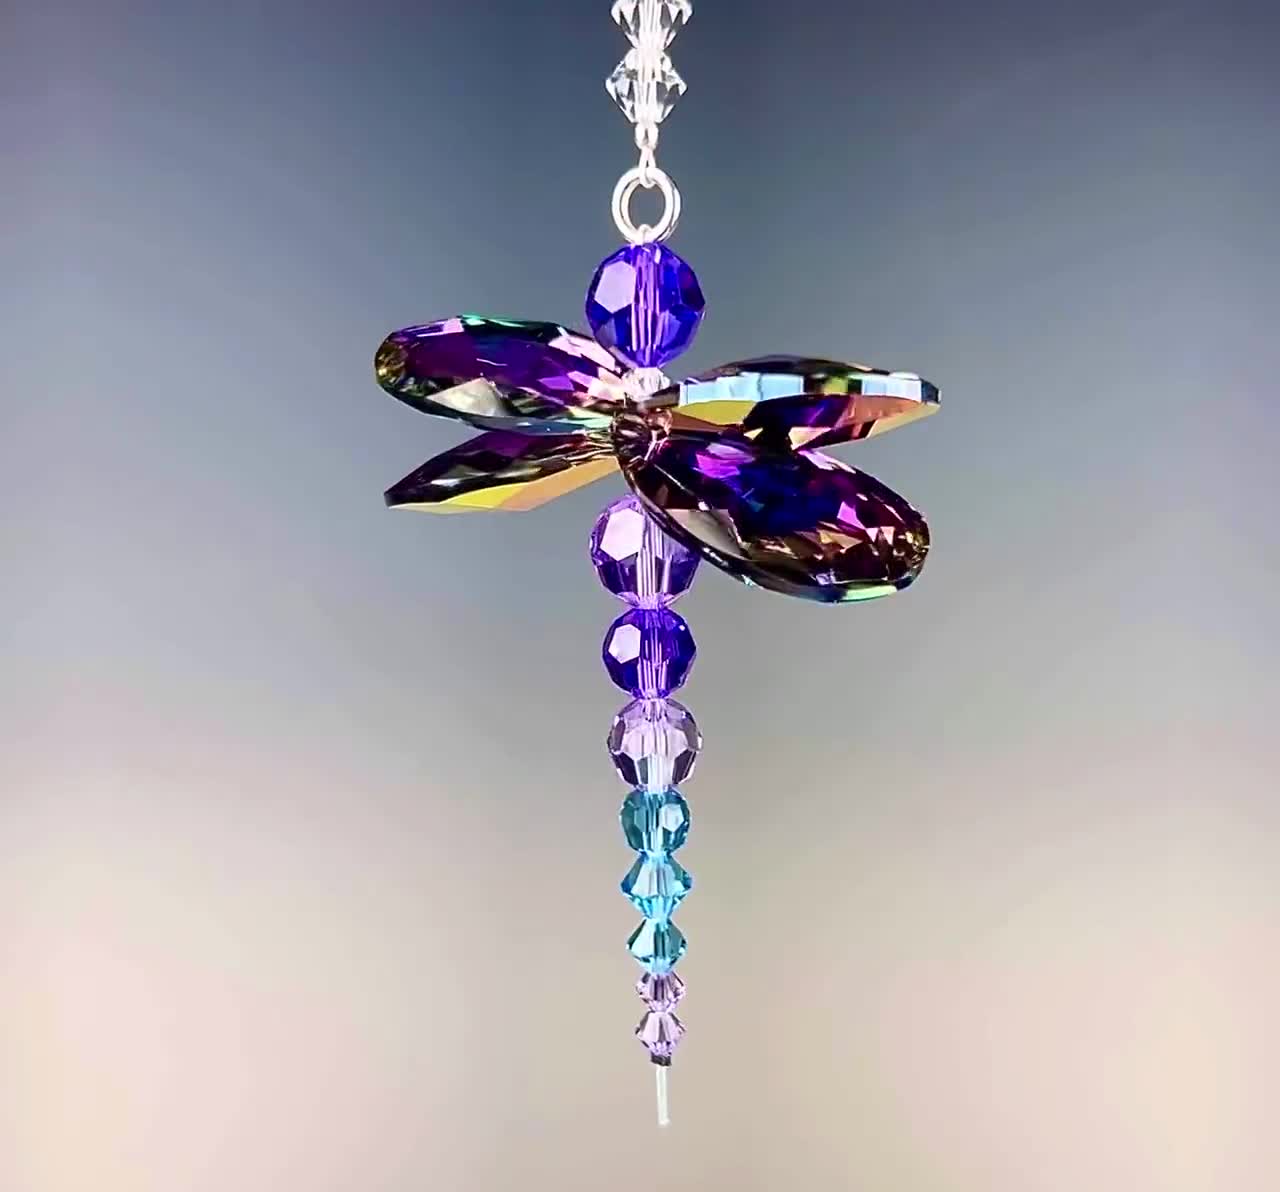 New! Swarovski Lavender Crystal Dragonfly Sun Catcher/Rearview Mirror  Decor. Beautiful Dragonfly Gifts